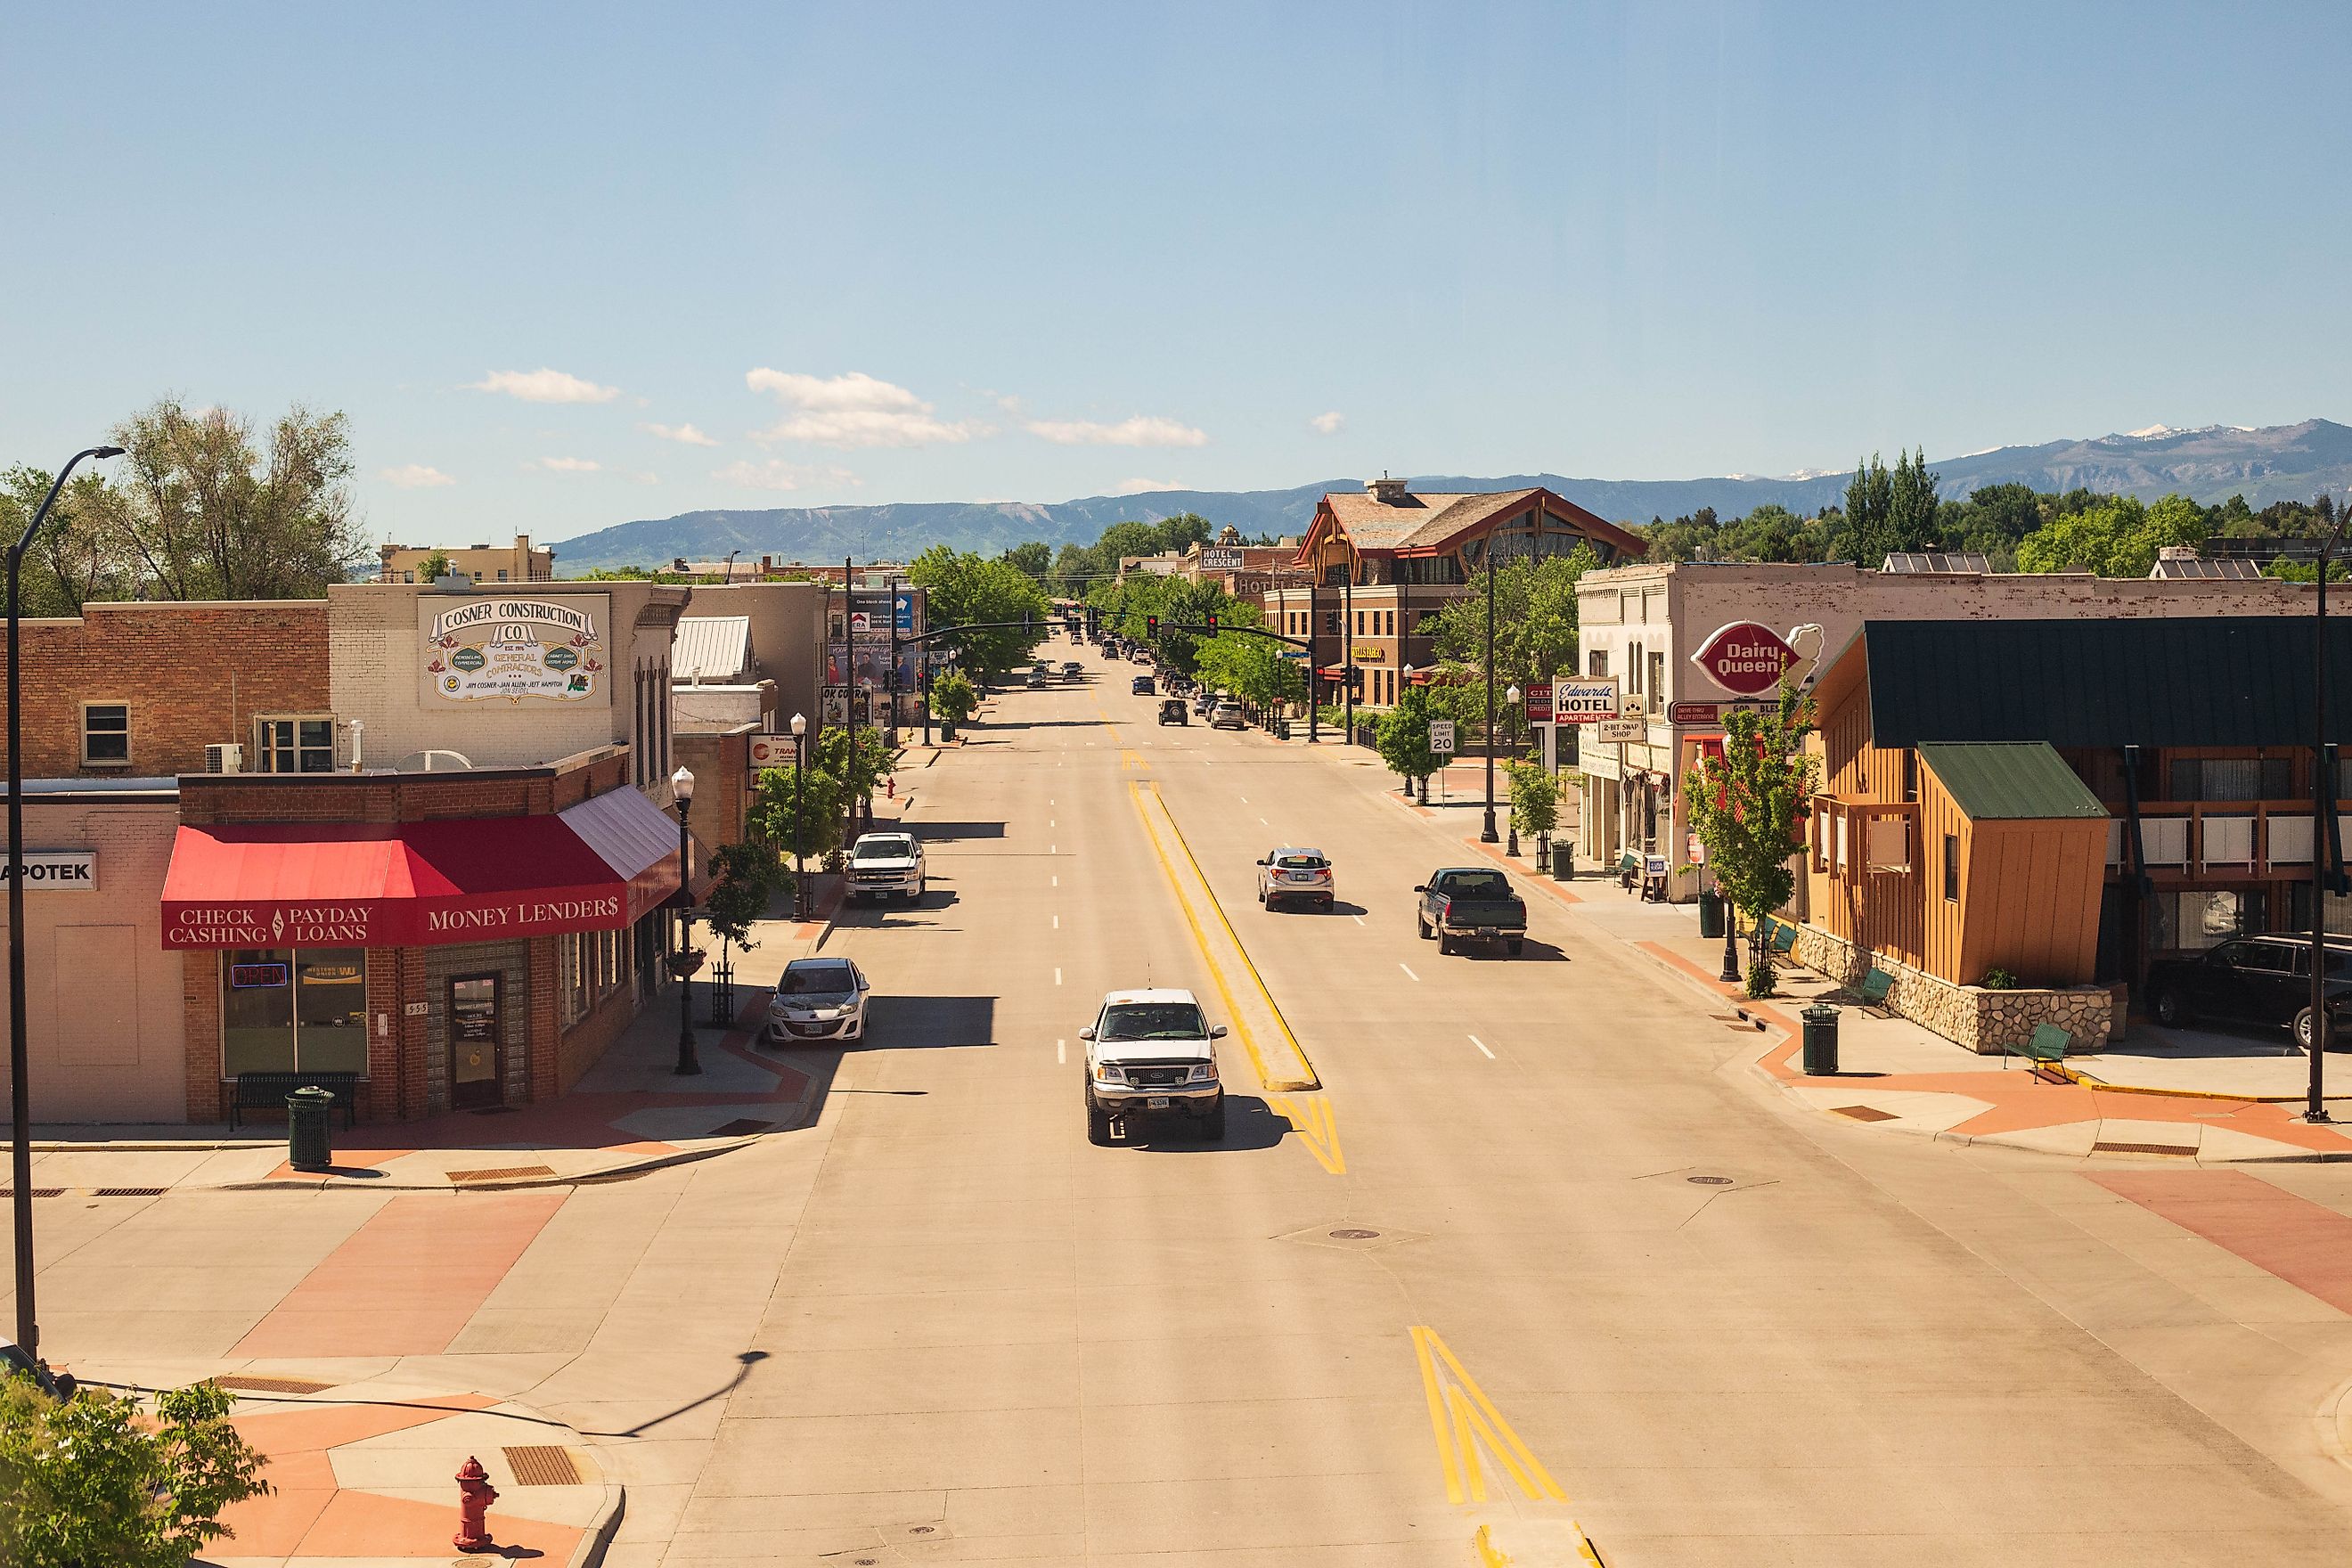 The downtown area of Sheridan, Wyoming.